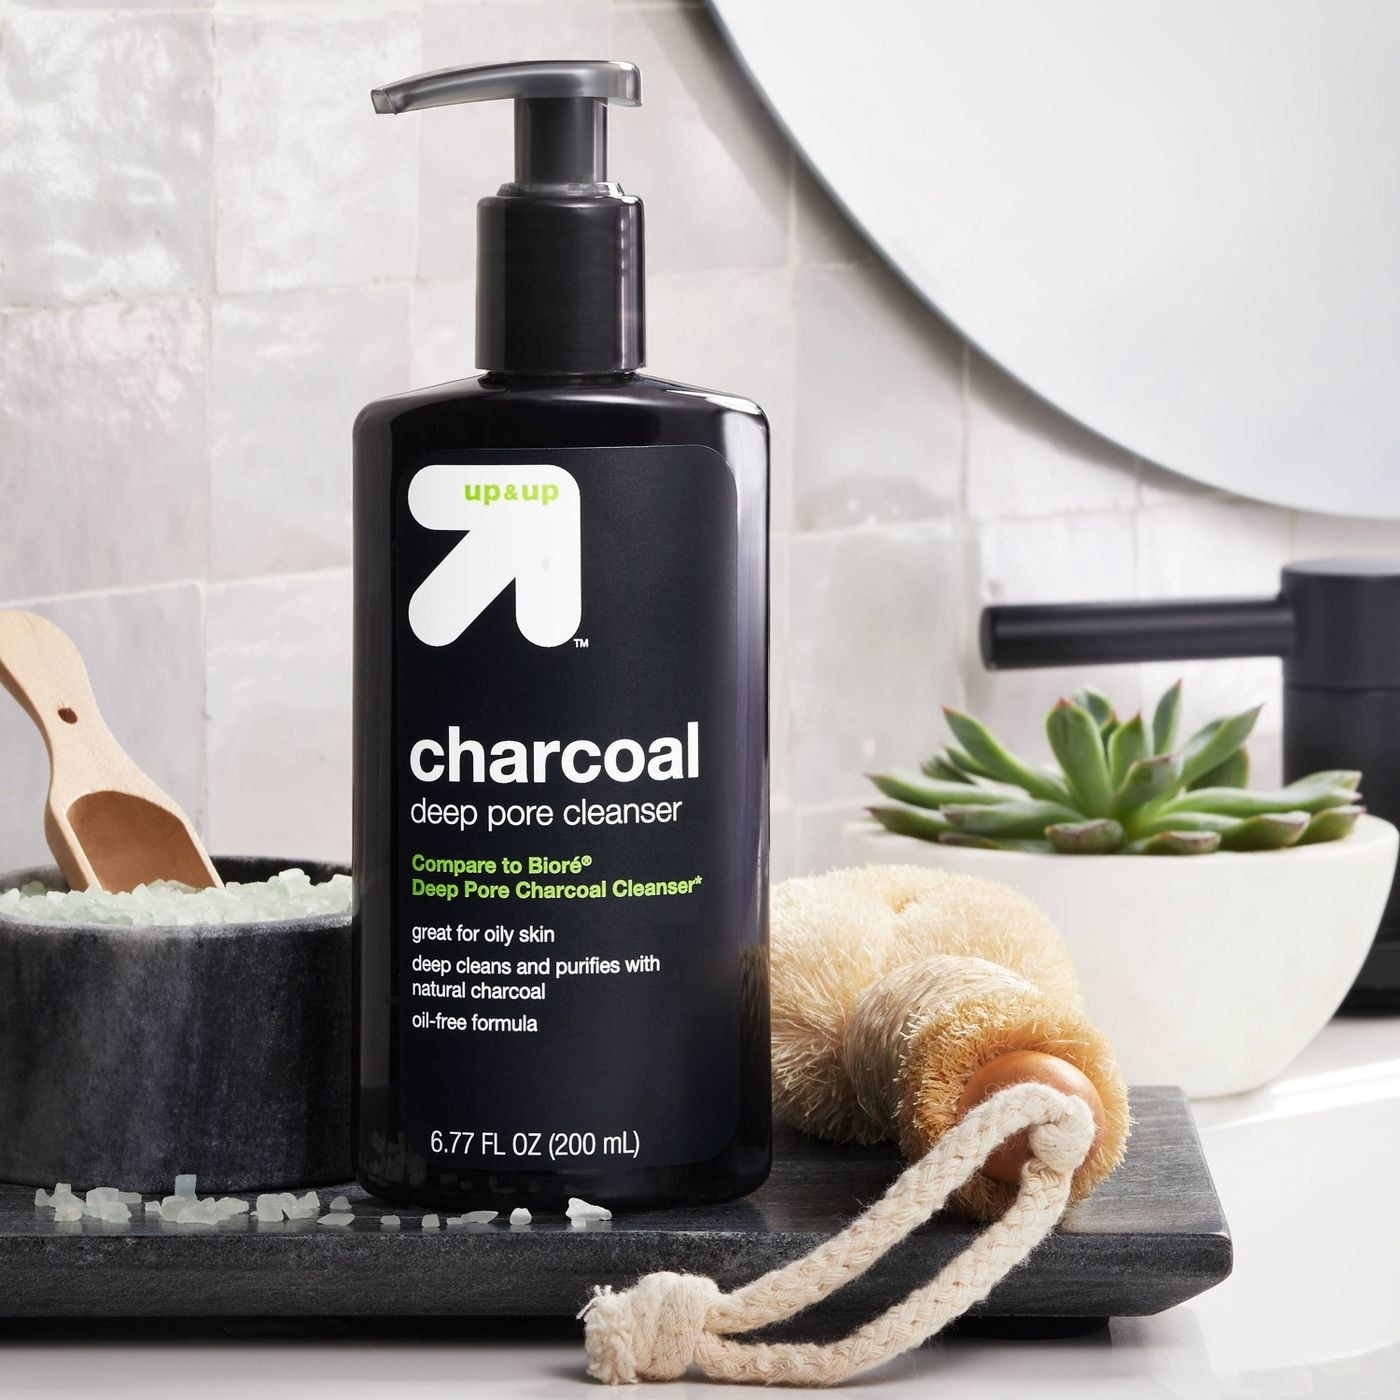 The deep pore cleanser made with charcoal